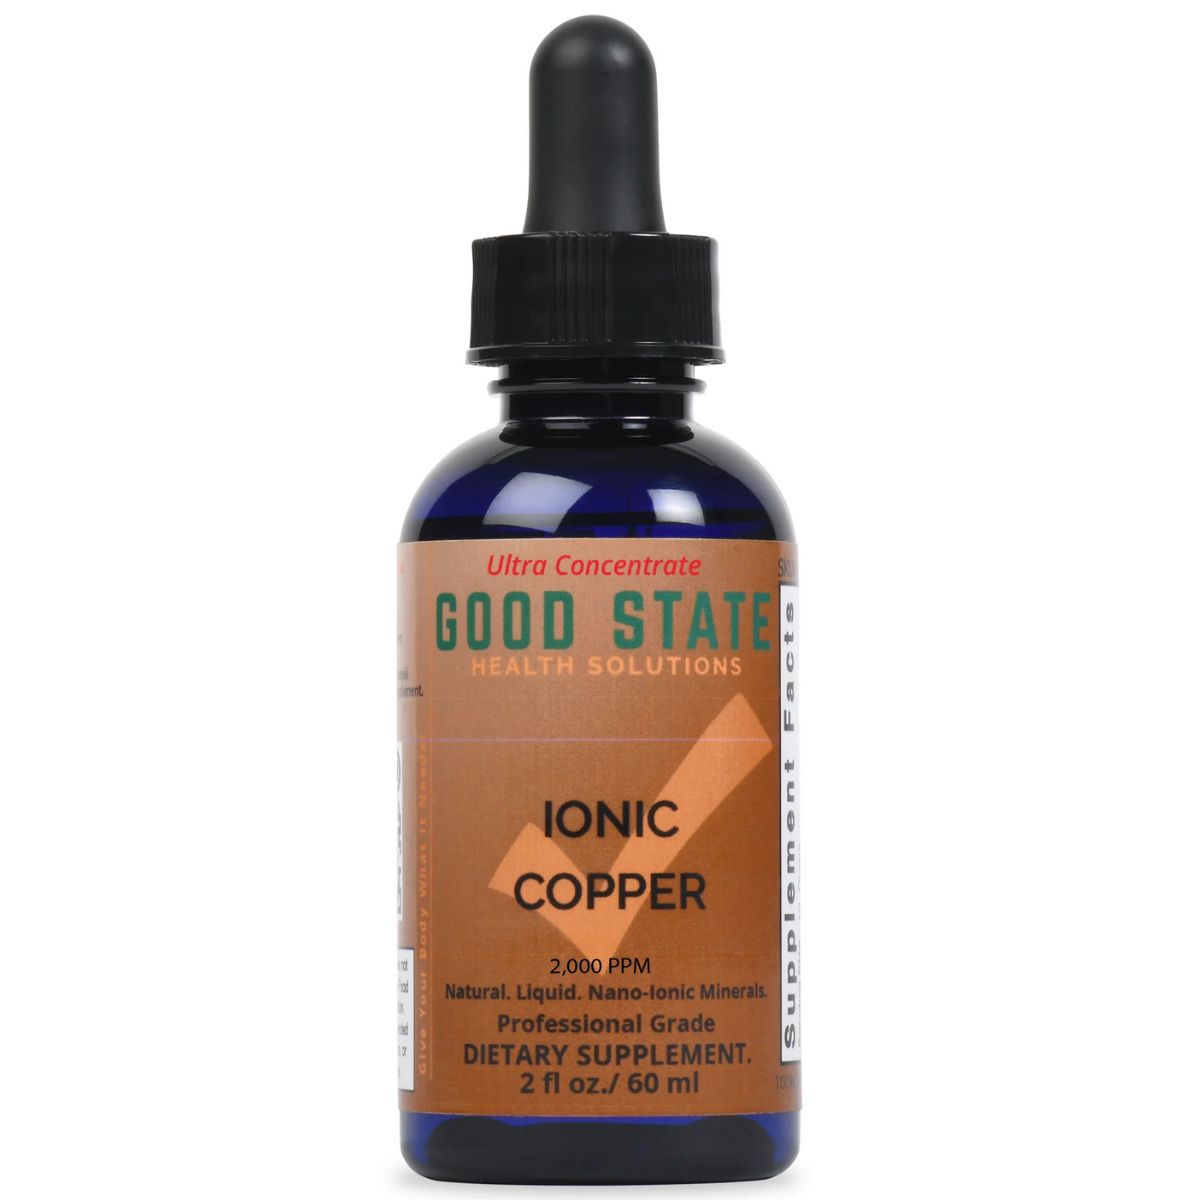 Ionic Copper on sale!